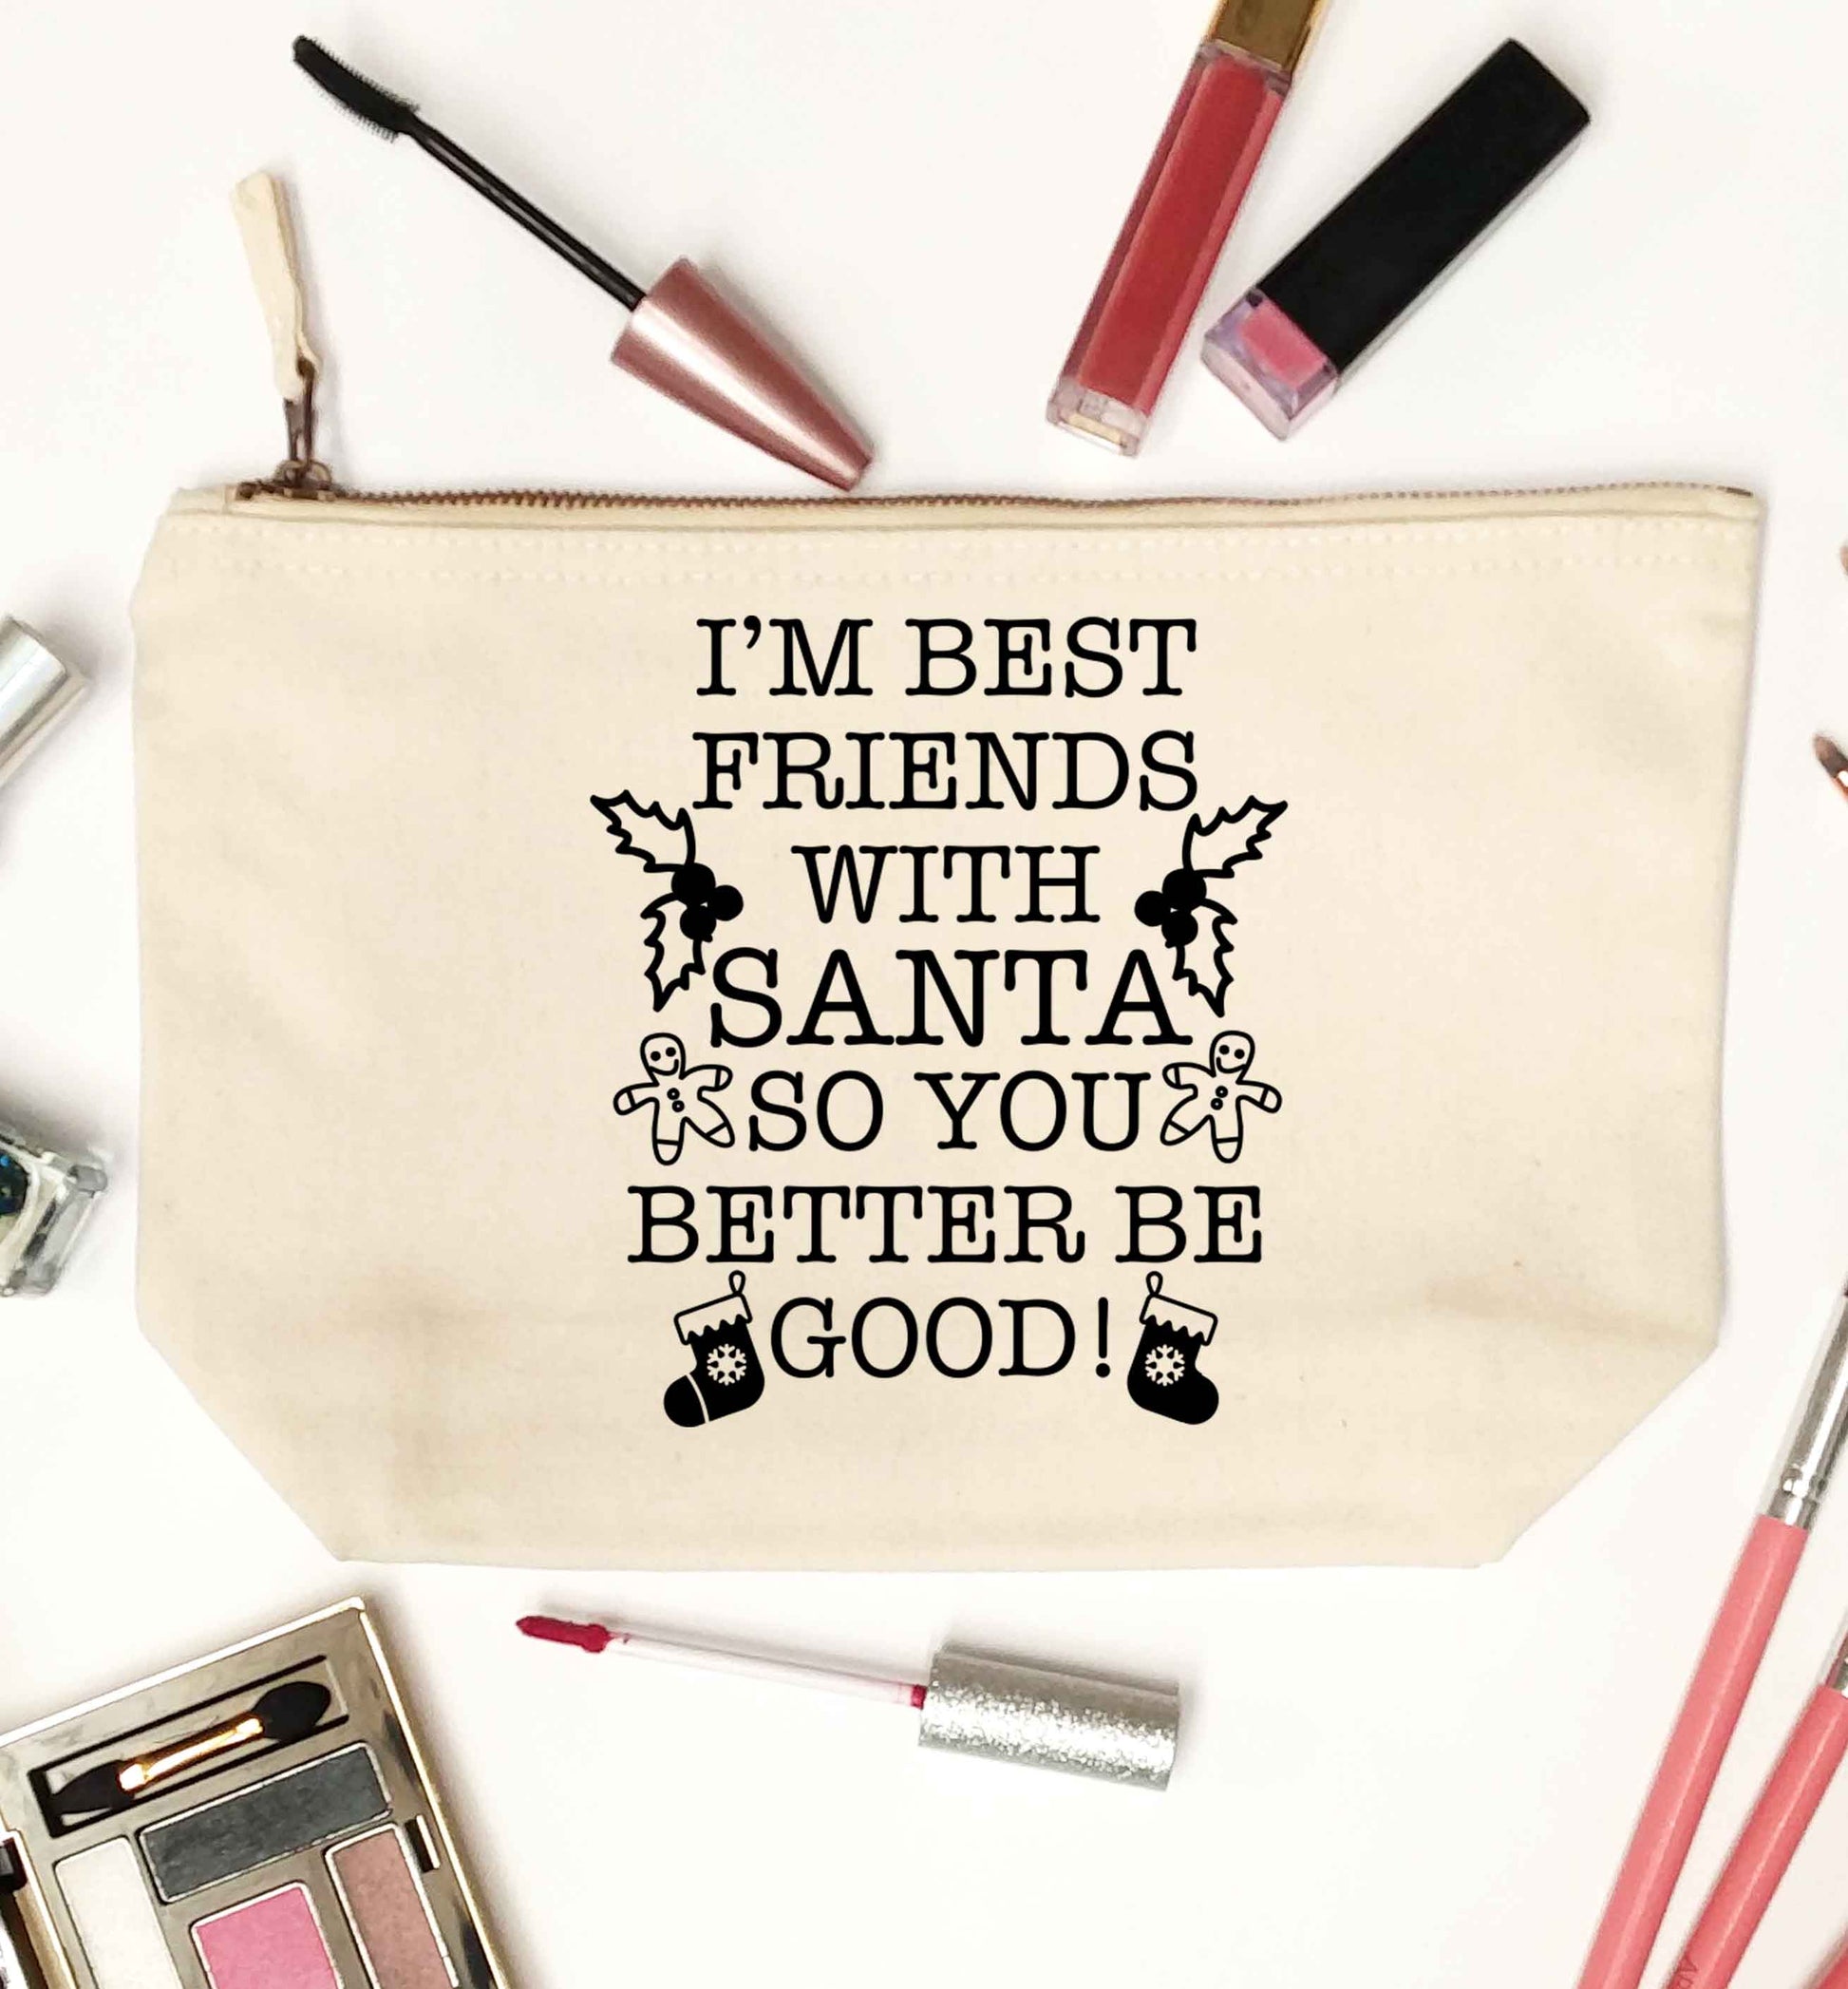 I'm best friends with santa so you better be good! natural makeup bag